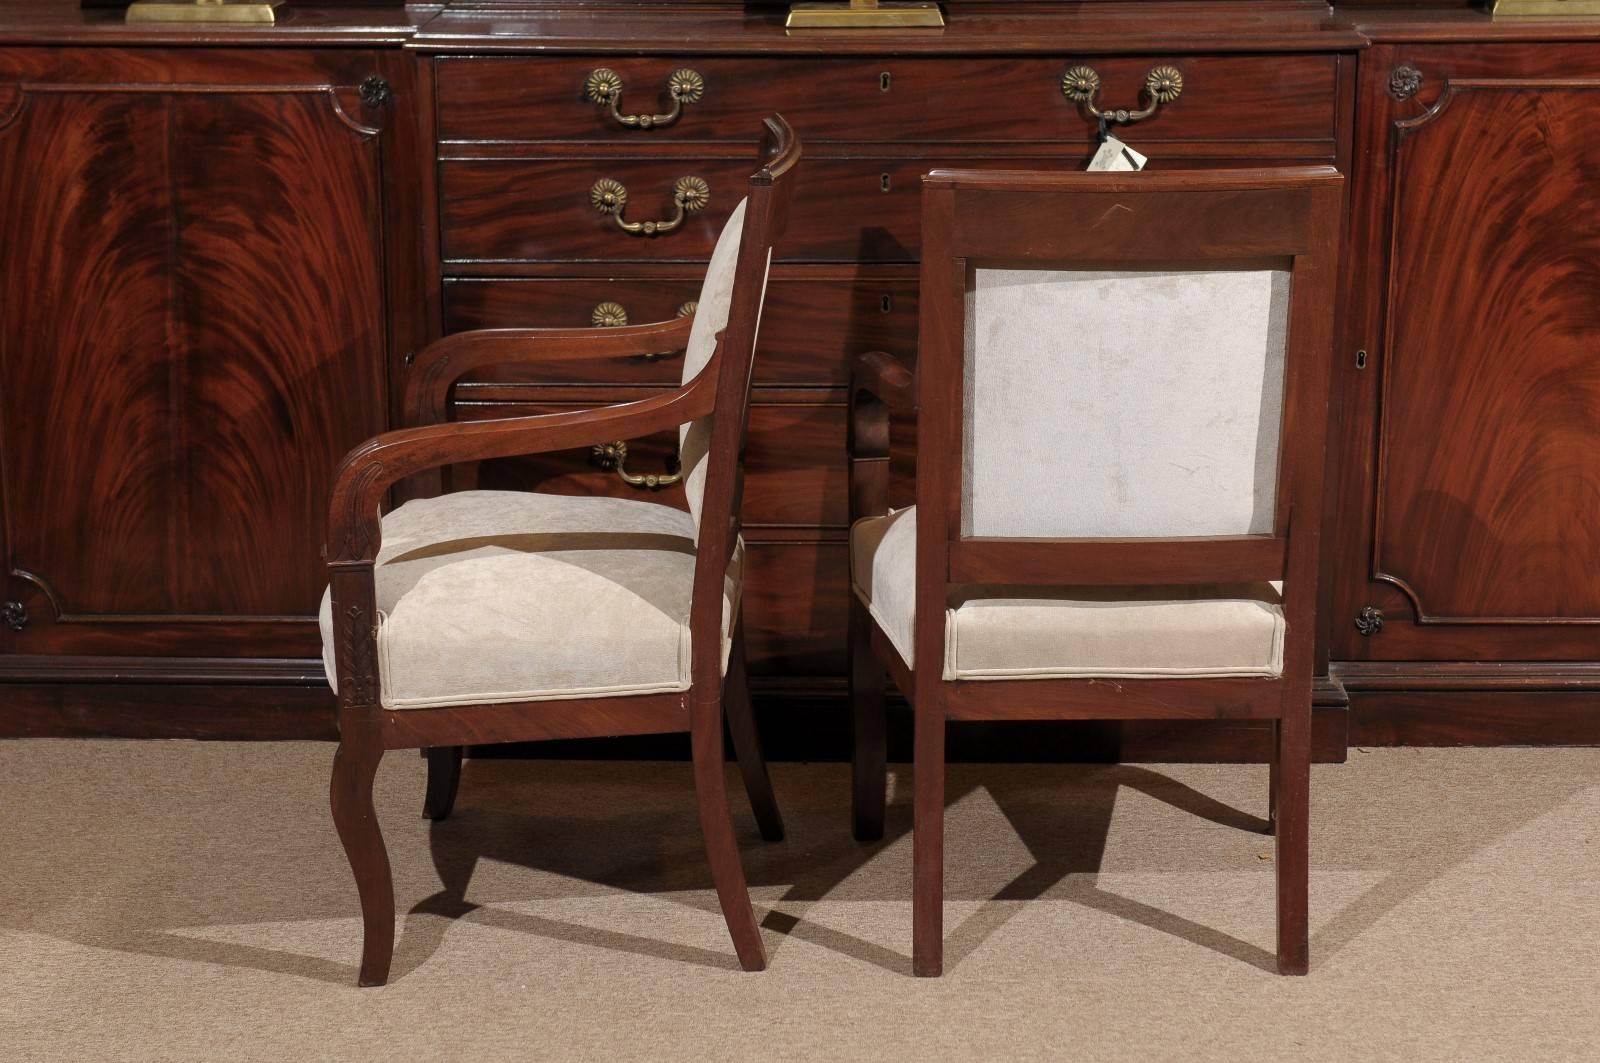 Pair of French Empire Mahogany Fauteuils, 19th Century, circa 1810 For Sale 2